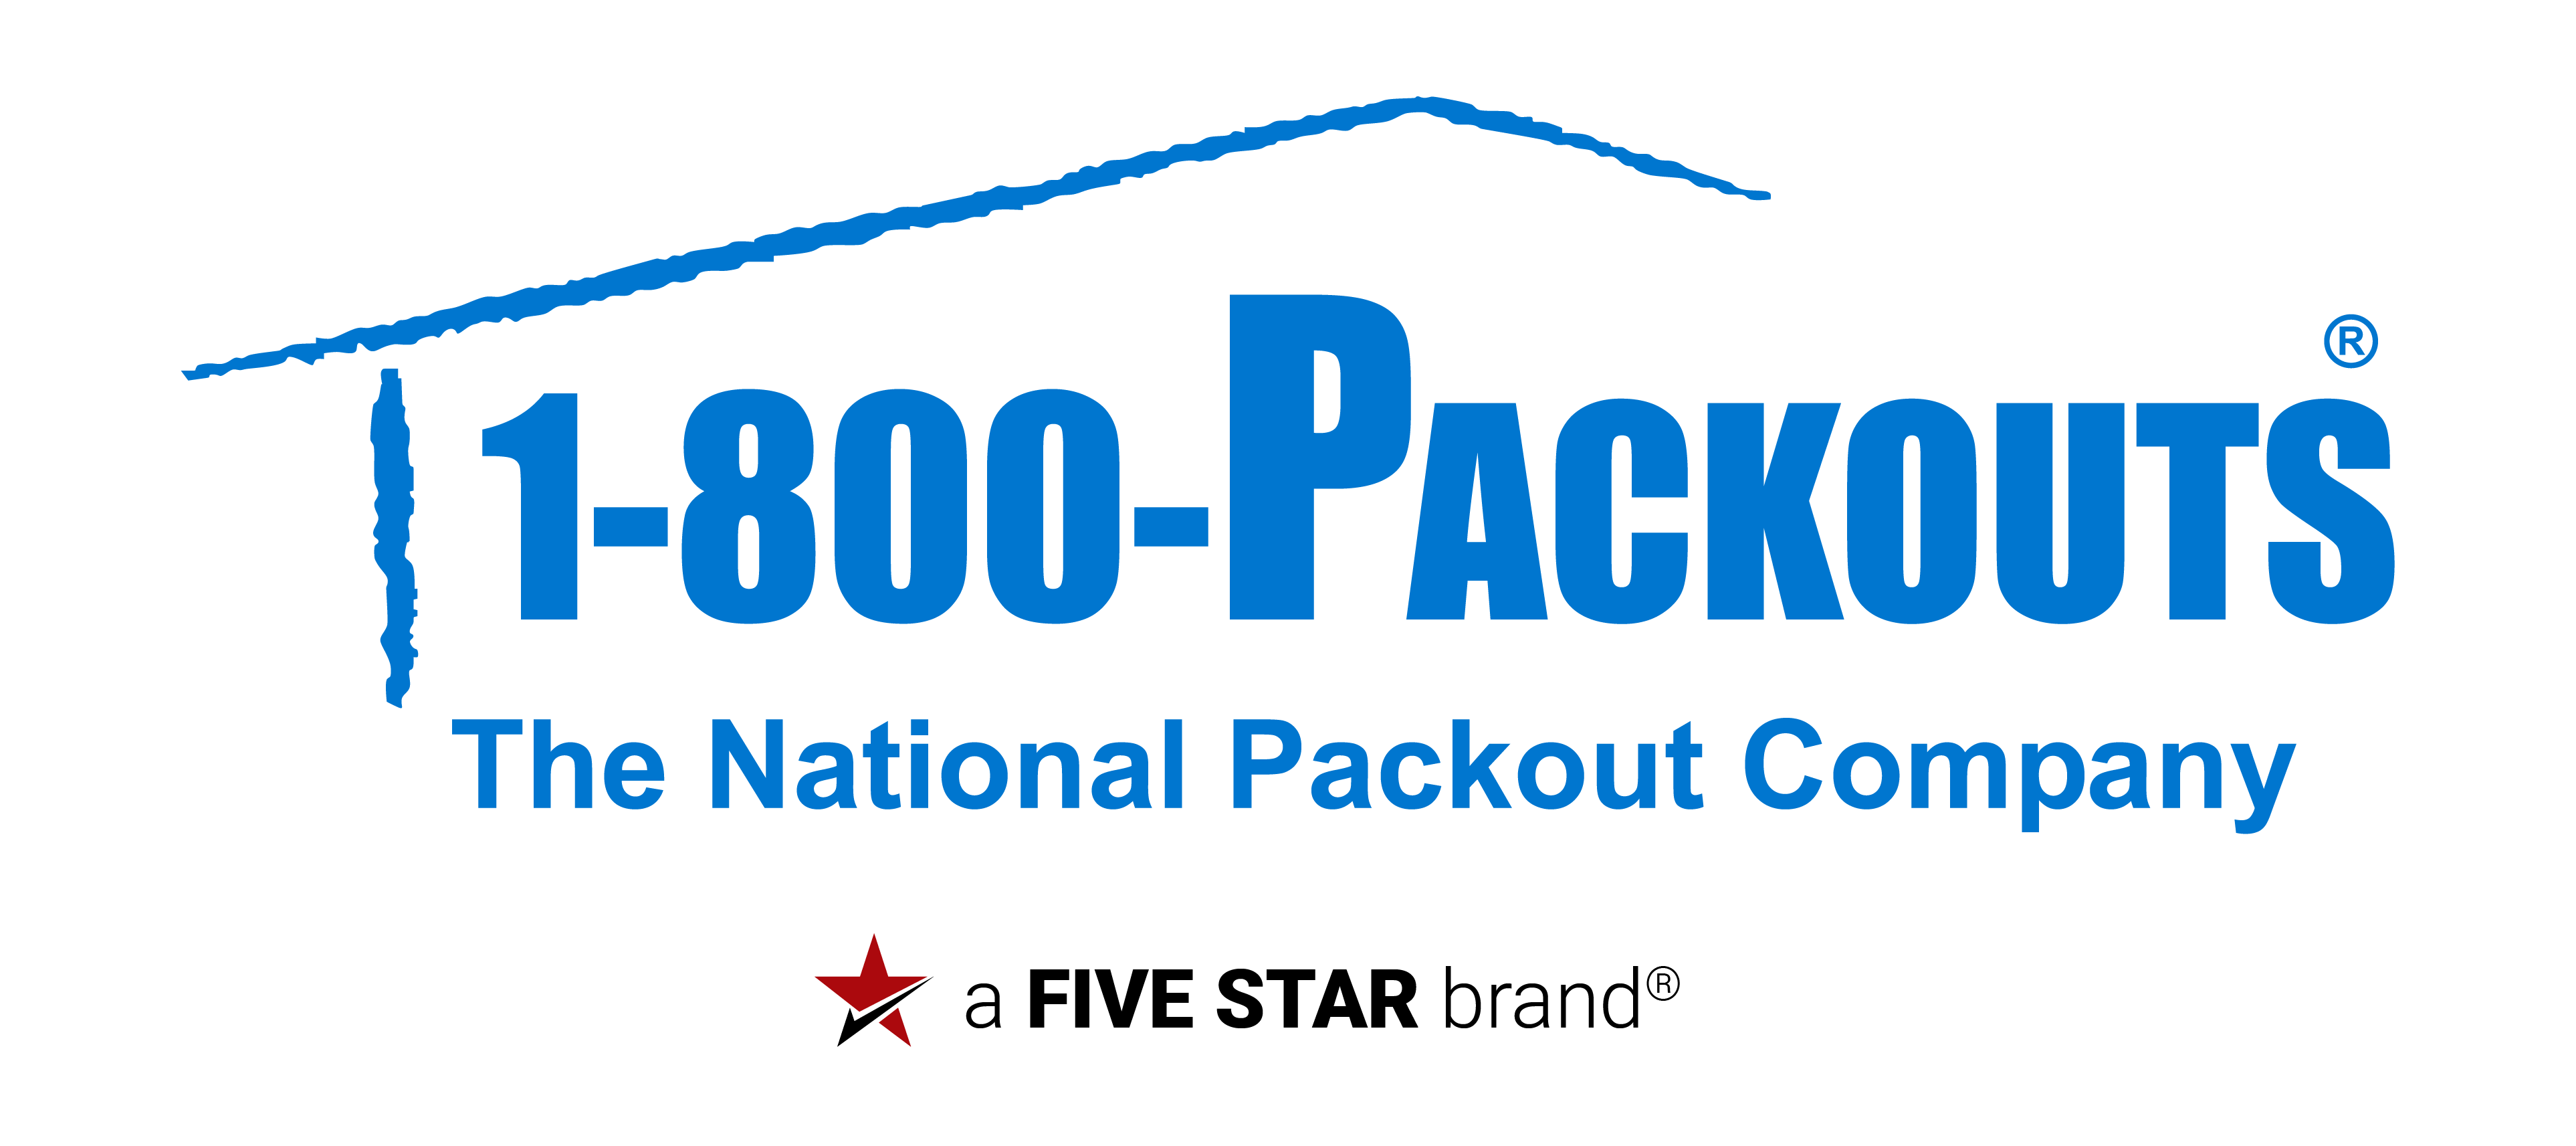 1-800-Packouts logo